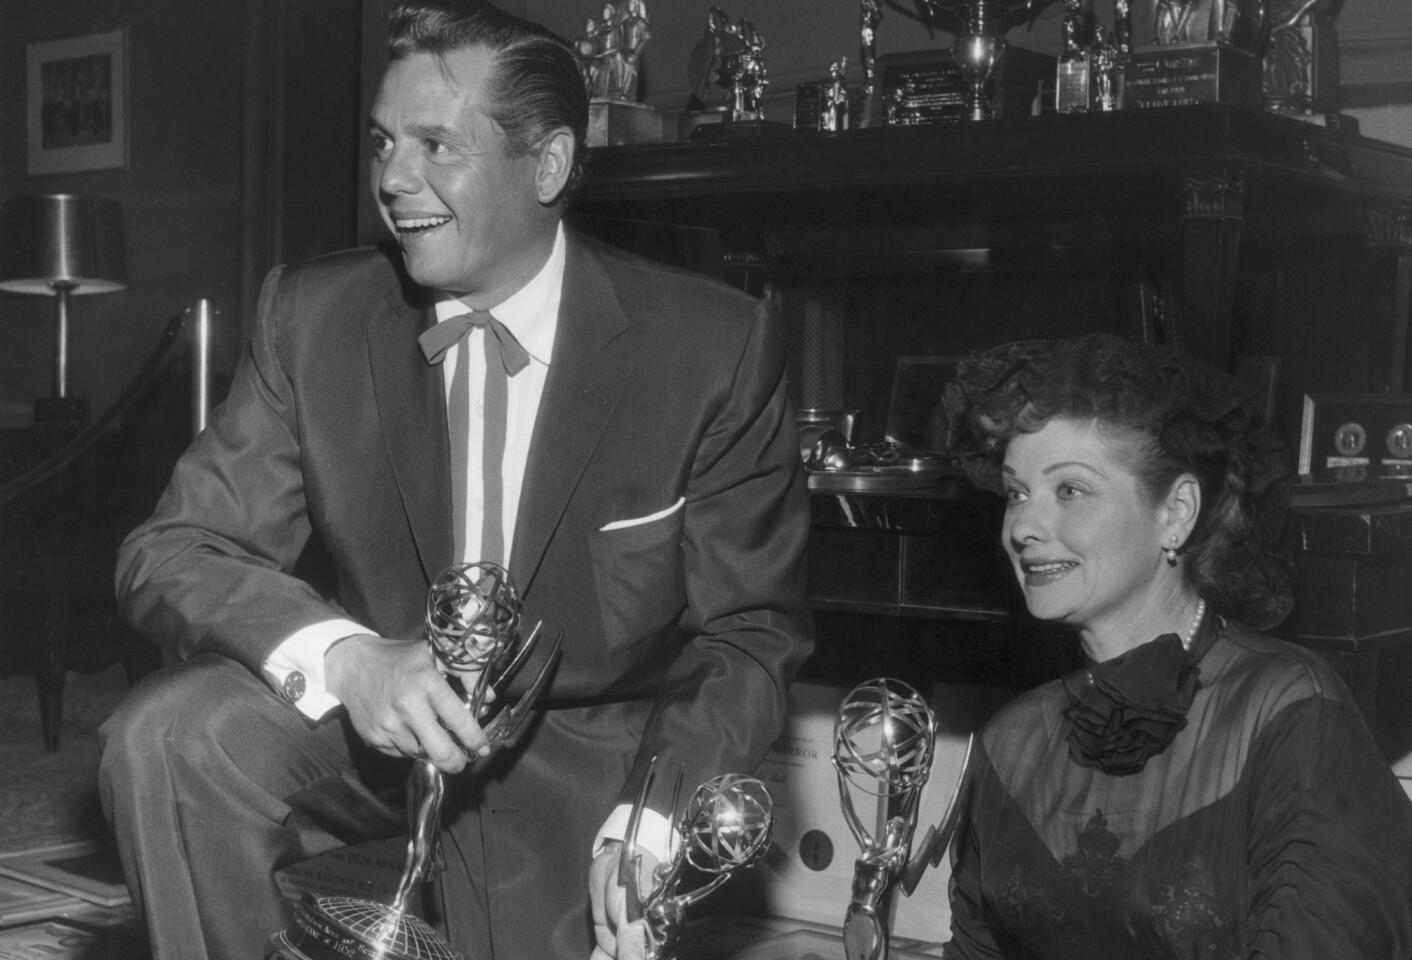 Lucille Ball and Desi Arnaz, power couple of the '50s, hosted the 4th Emmy Awards show. Their night as emcees marked the first time television personalities had hosted the ceremony. A coincidence in numbers: Ball won a total of four Emmys throughout her career.